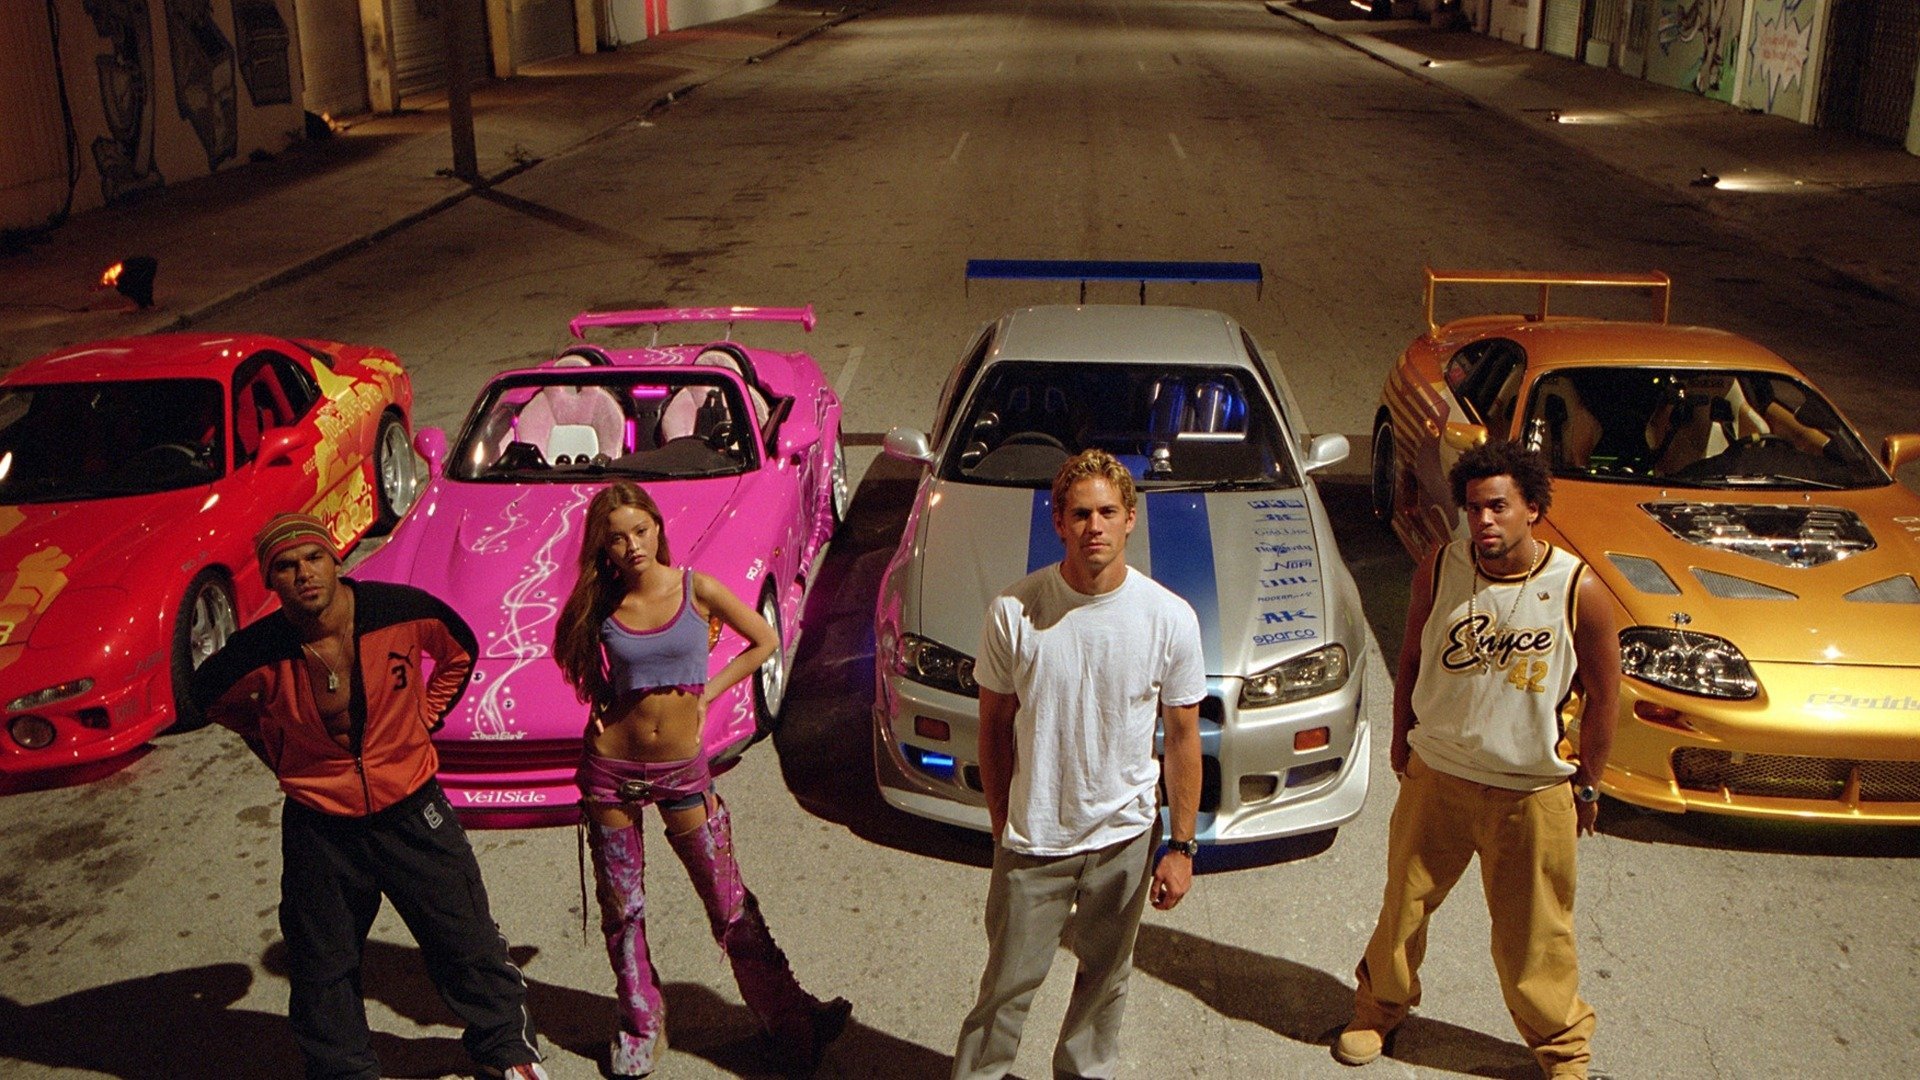 The Fast and the Furious: Tokyo Drift in Portland at Cinemagic